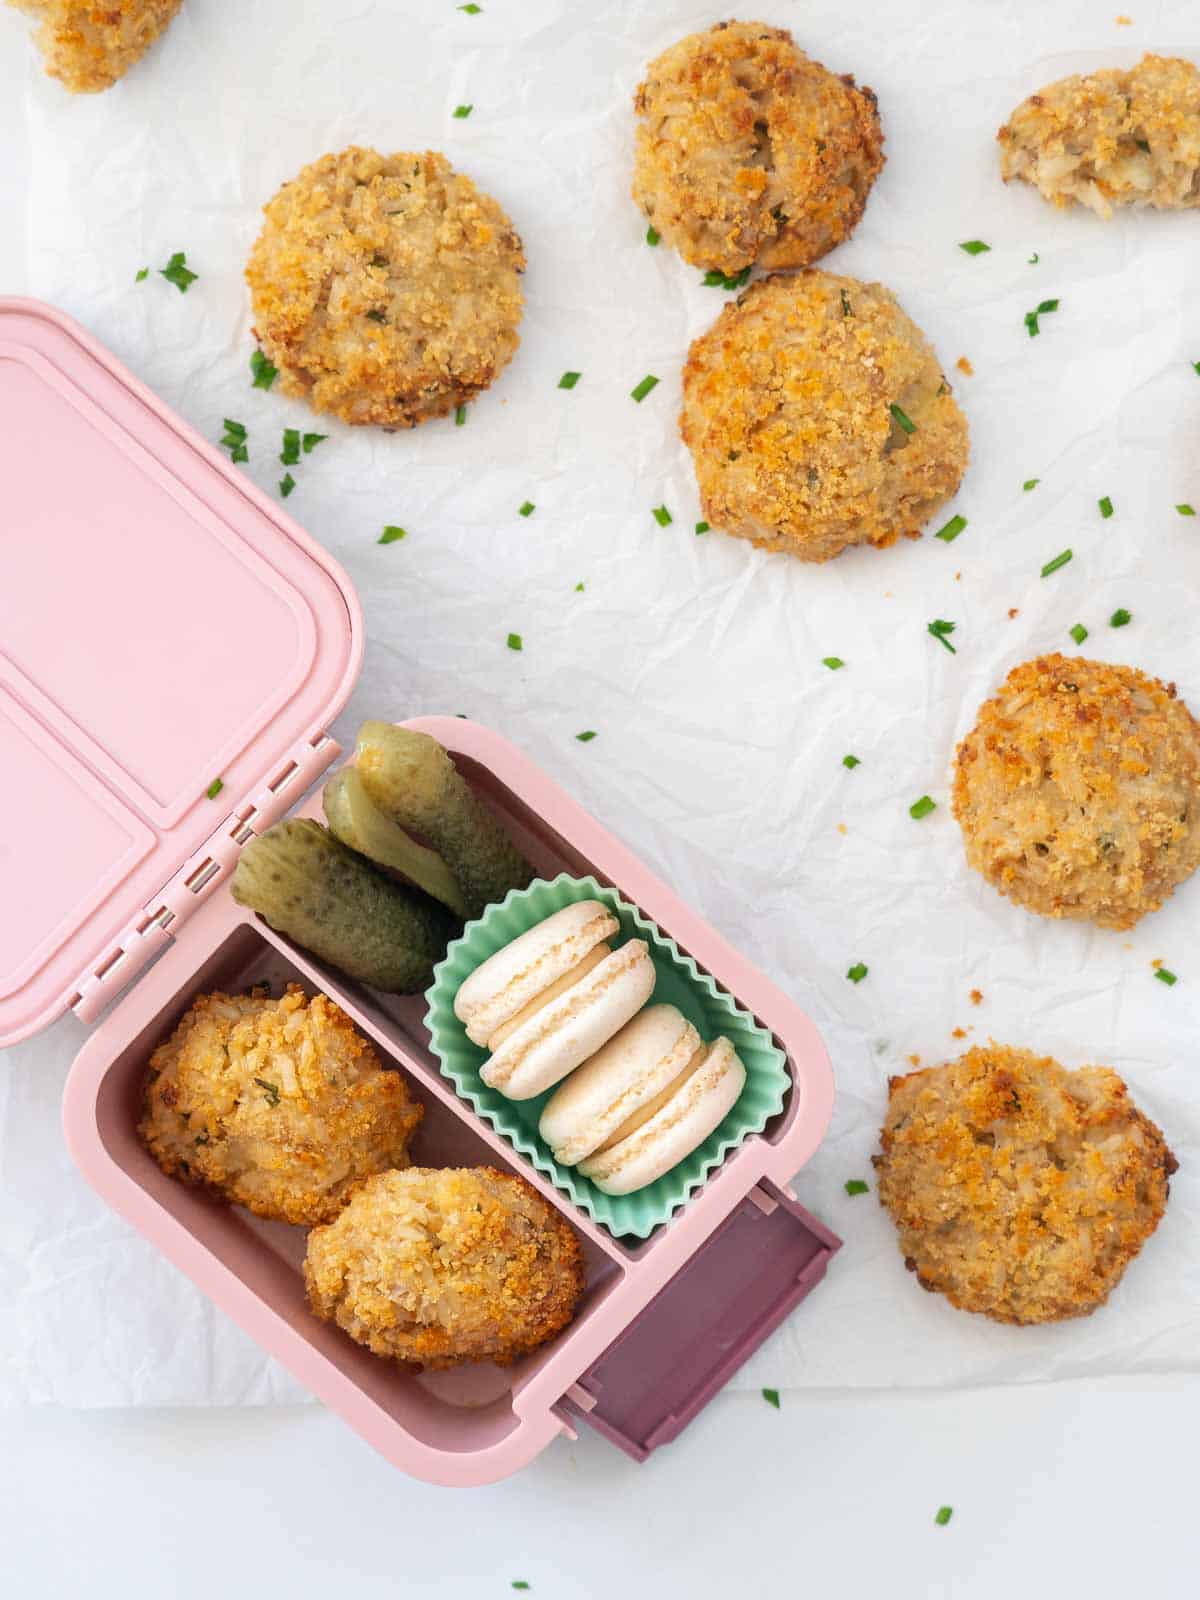 Tuna rice balls packed into a small pink bento box with cookies and vegetables. 